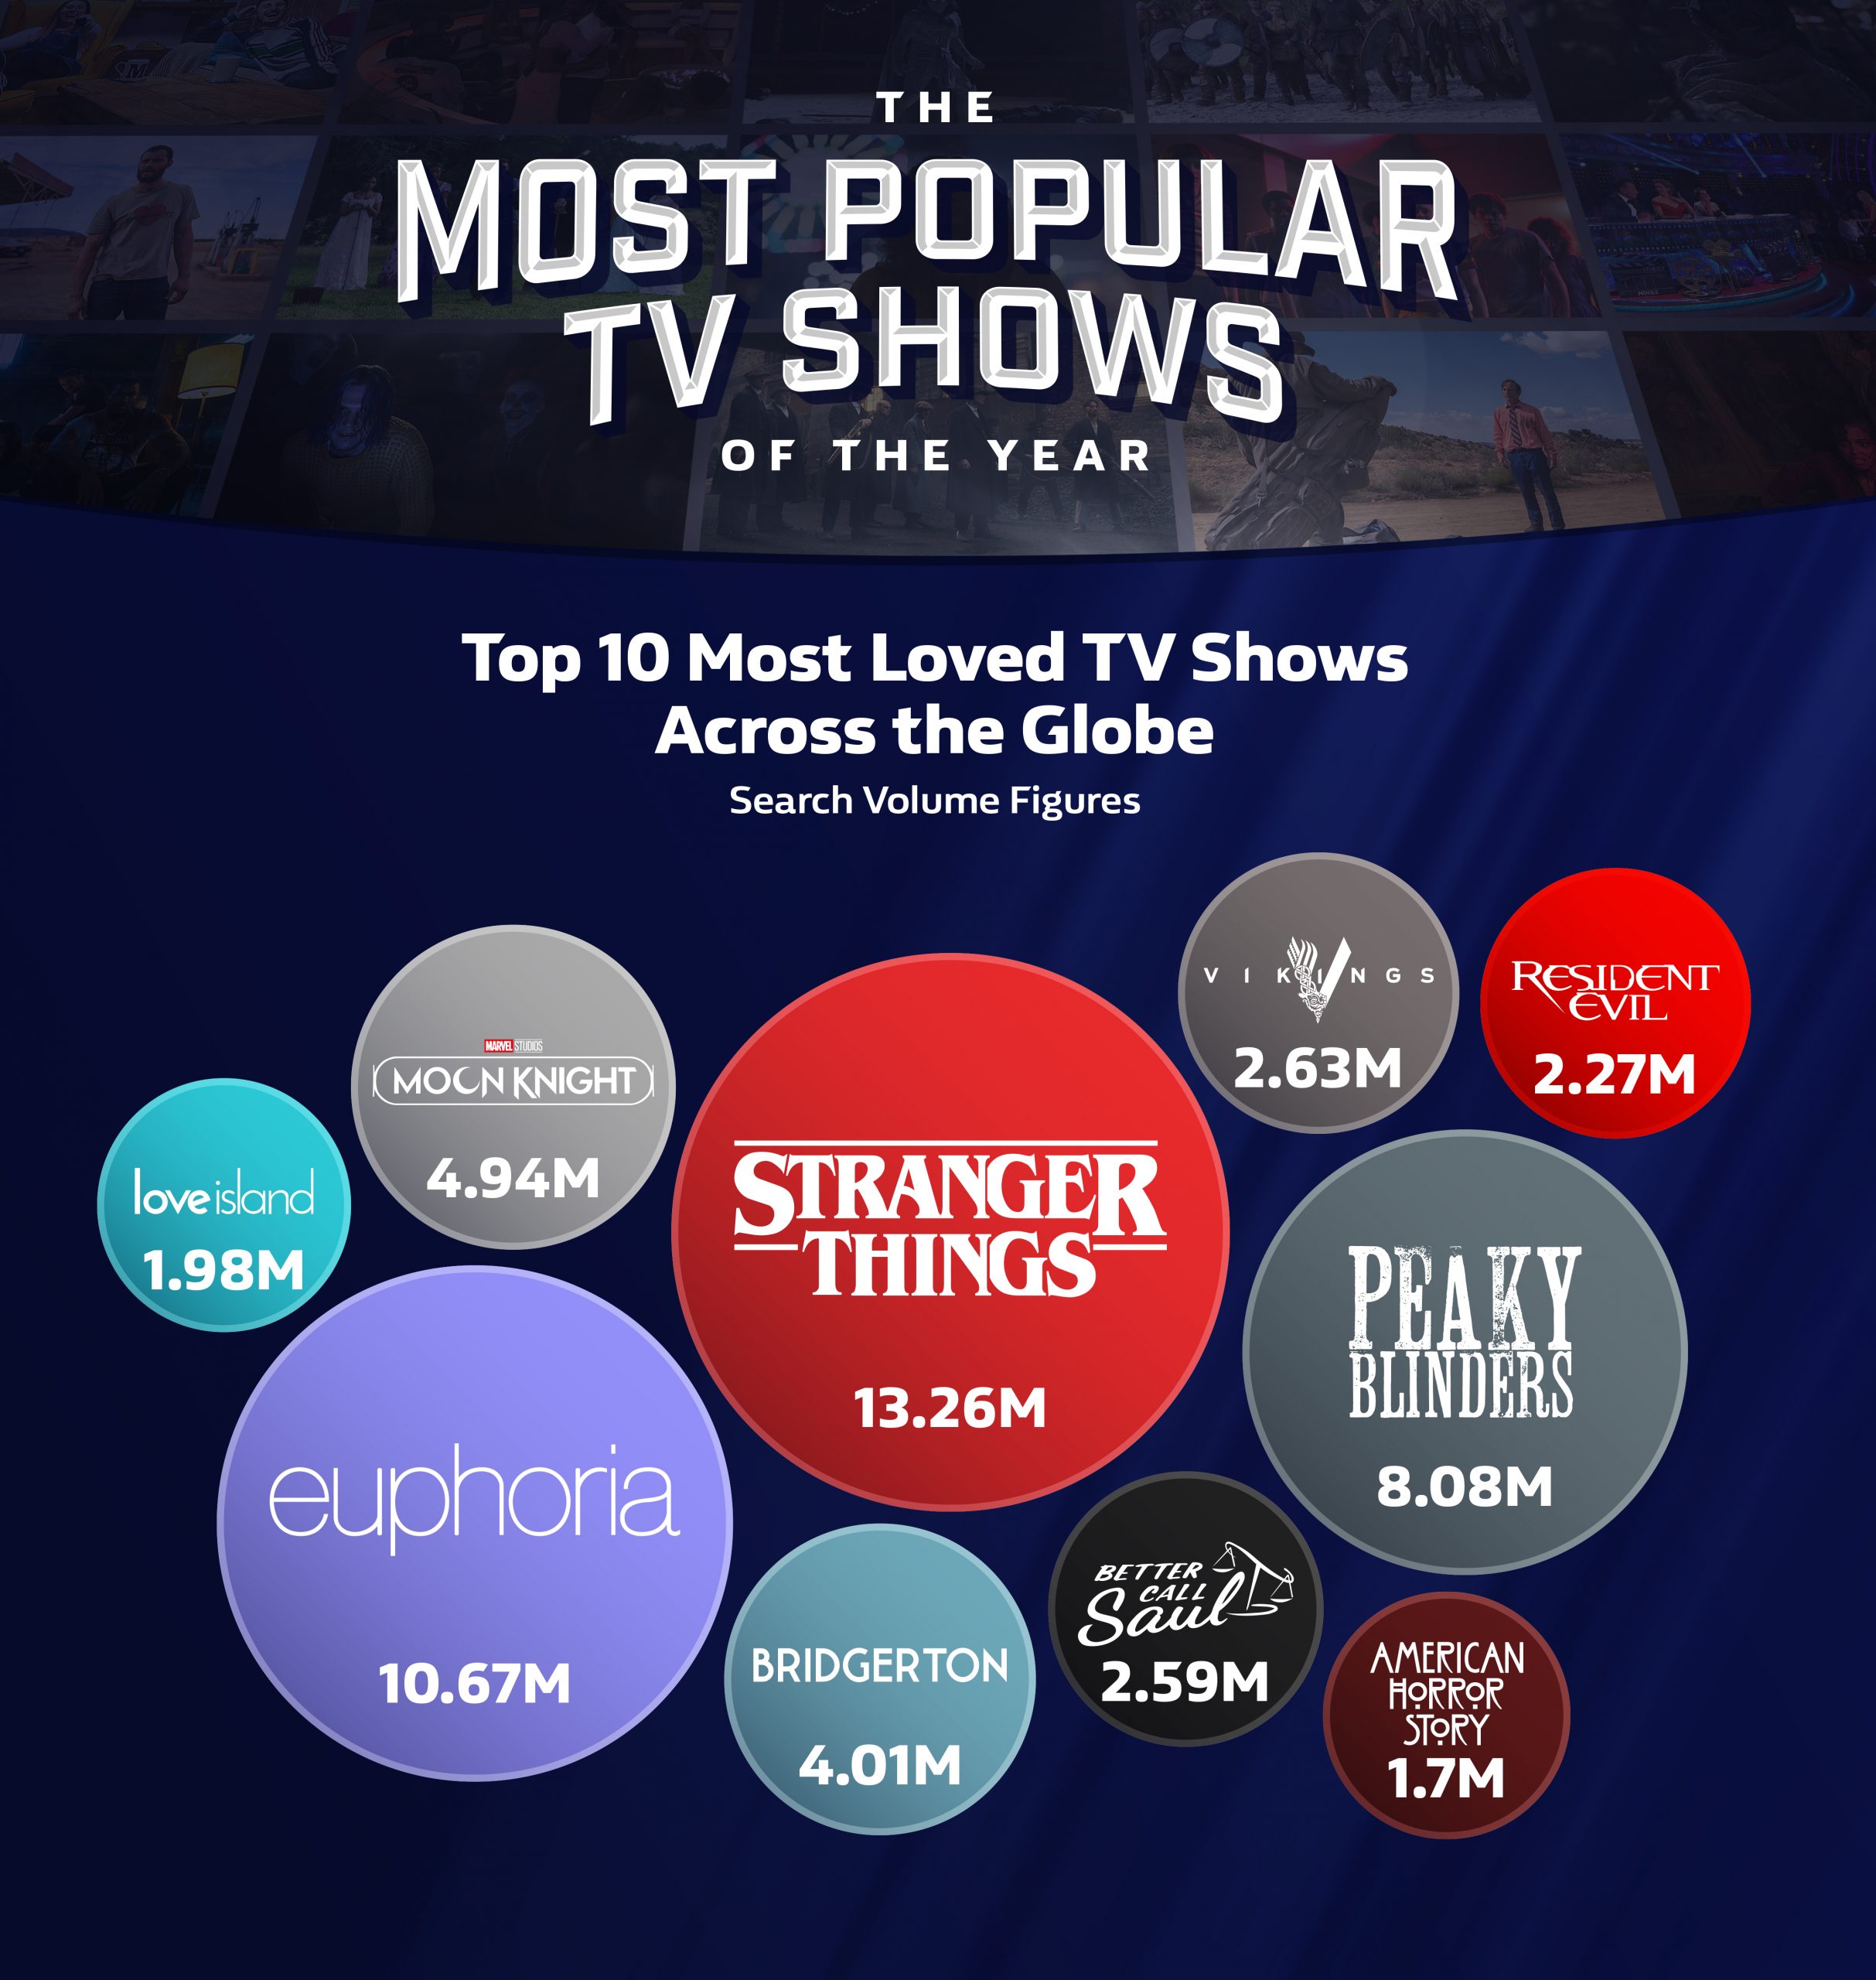 Top 10 TV shows in the world